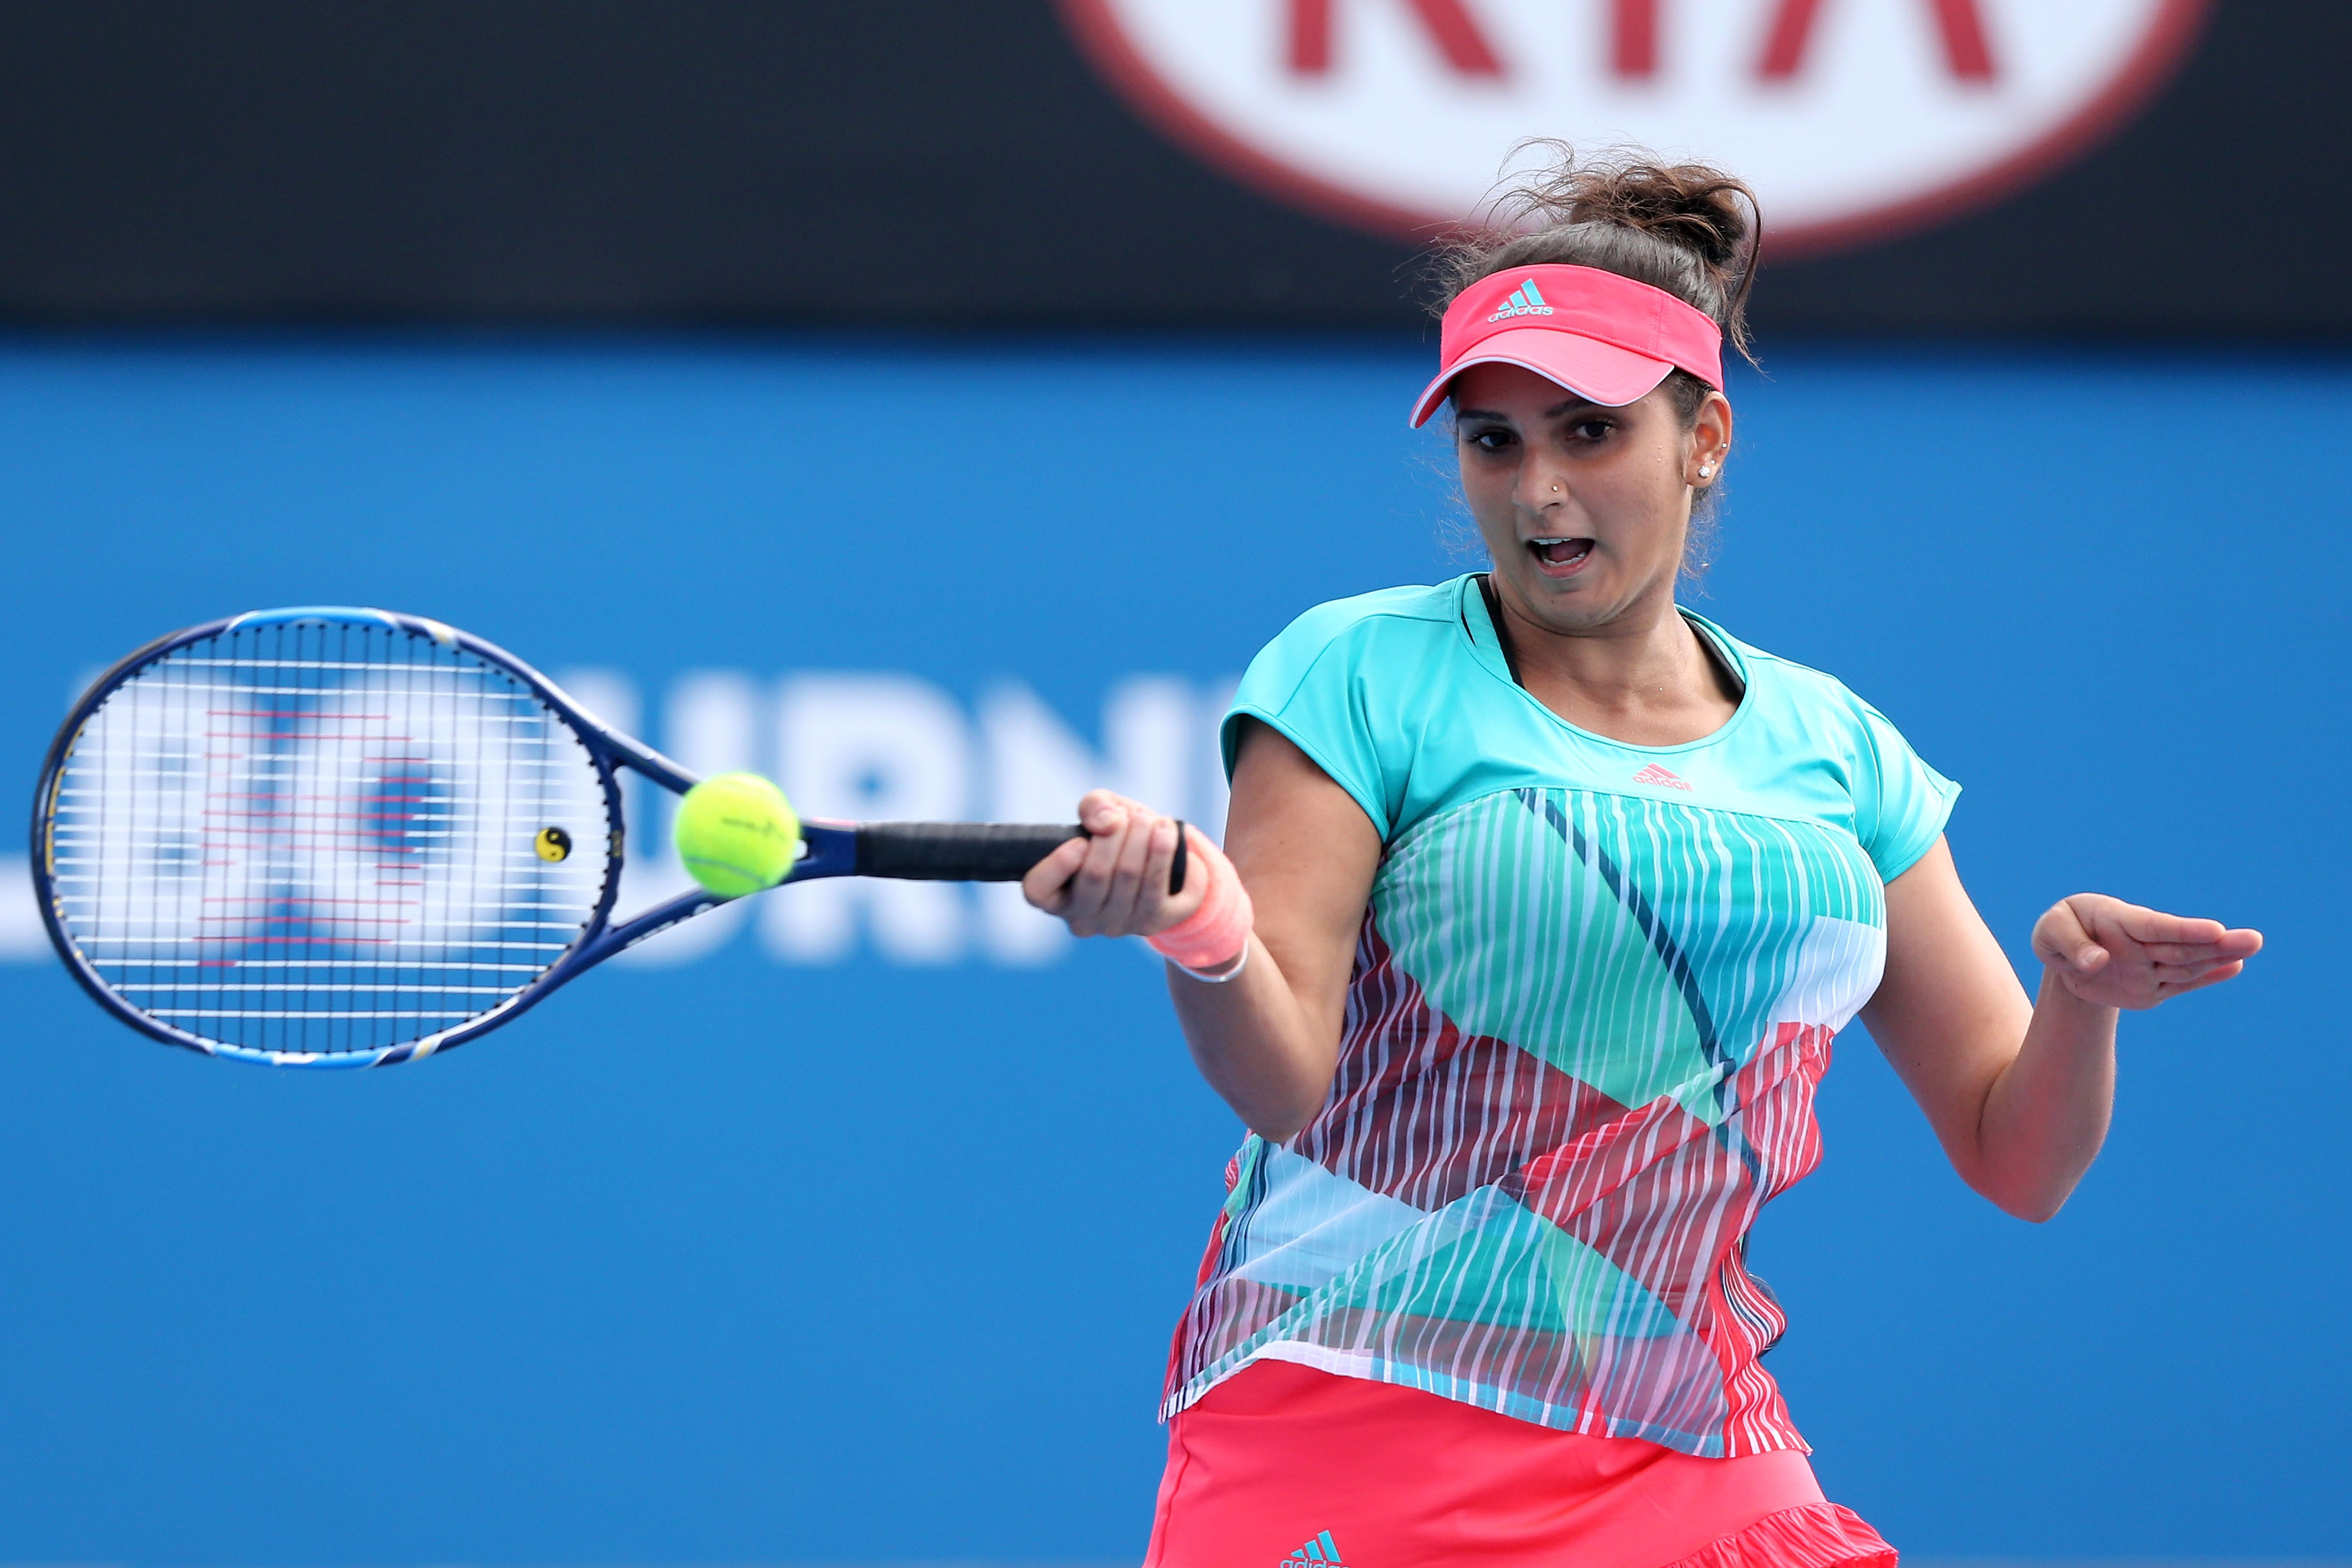 Australian Open 2022 | Decided that this will be my last season, reveals Sania Mirza 